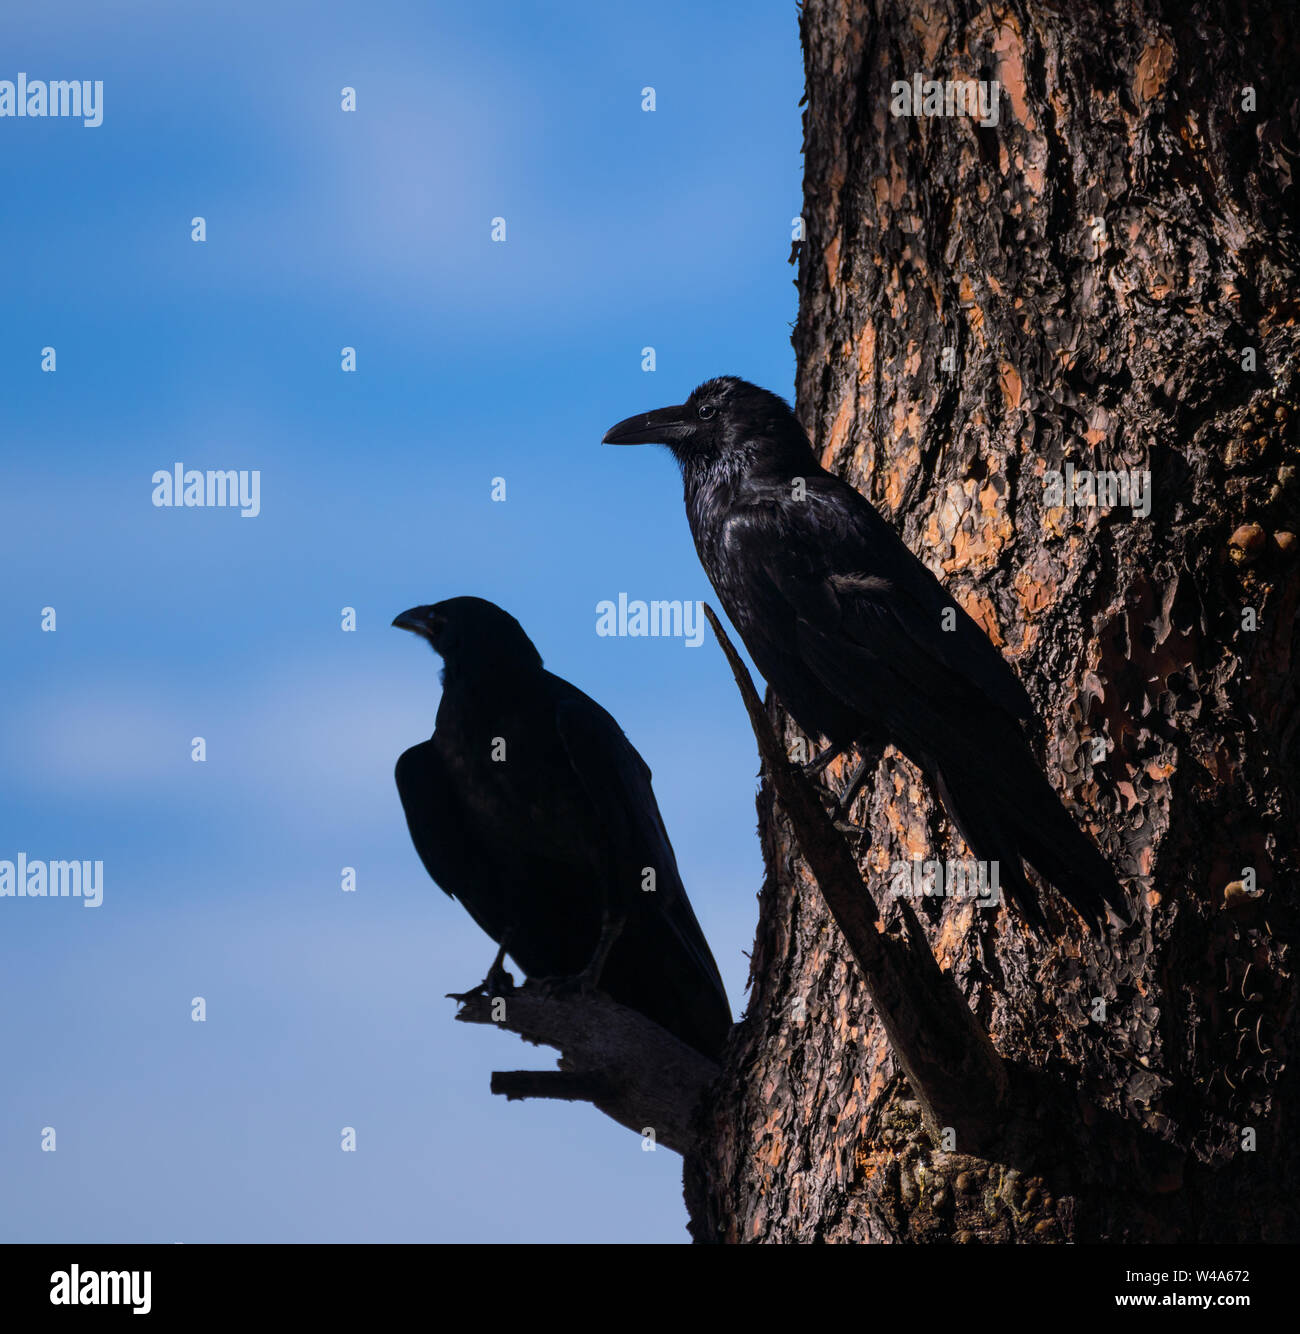 Two Crows Perched in a Large Tree. The second Crow Almost Looks Like a Shadow of the First One. Stock Photo